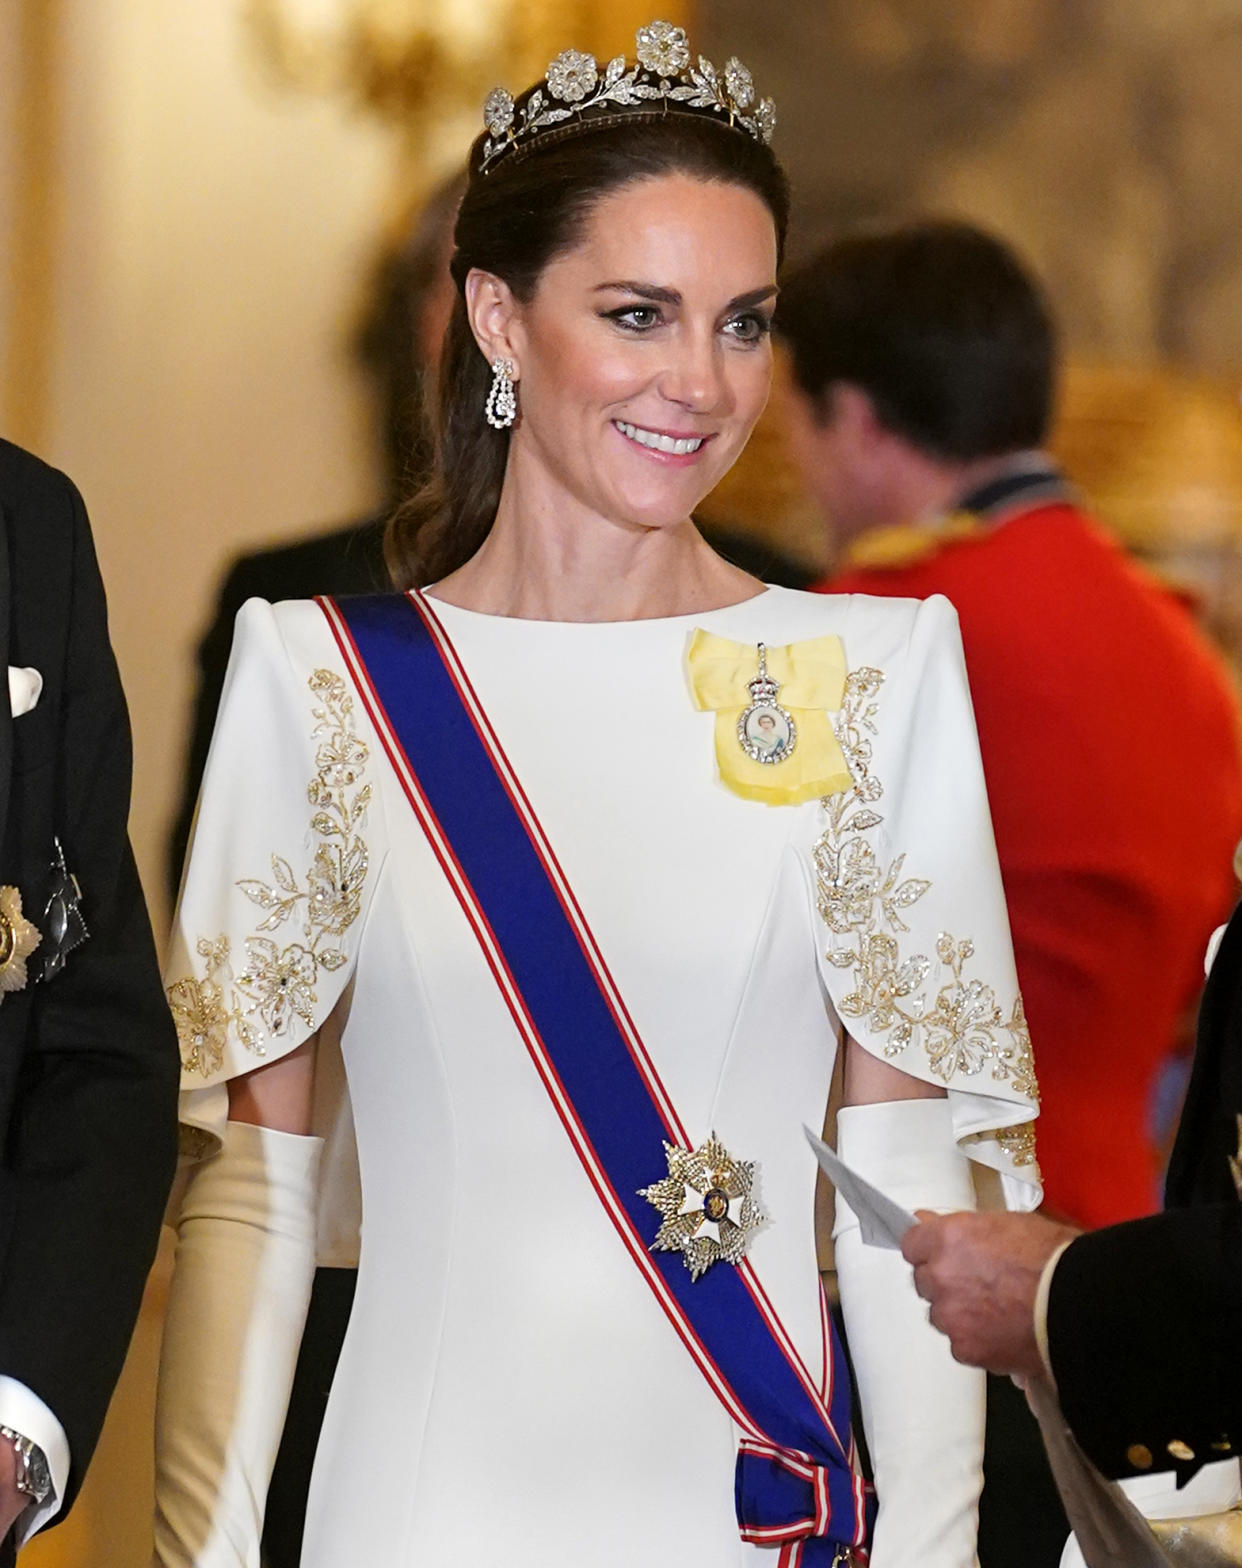 Princess Kate Wears Rare Diamond Tiara That Hasn’t Been Worn in Almost a Century to a State Banquet